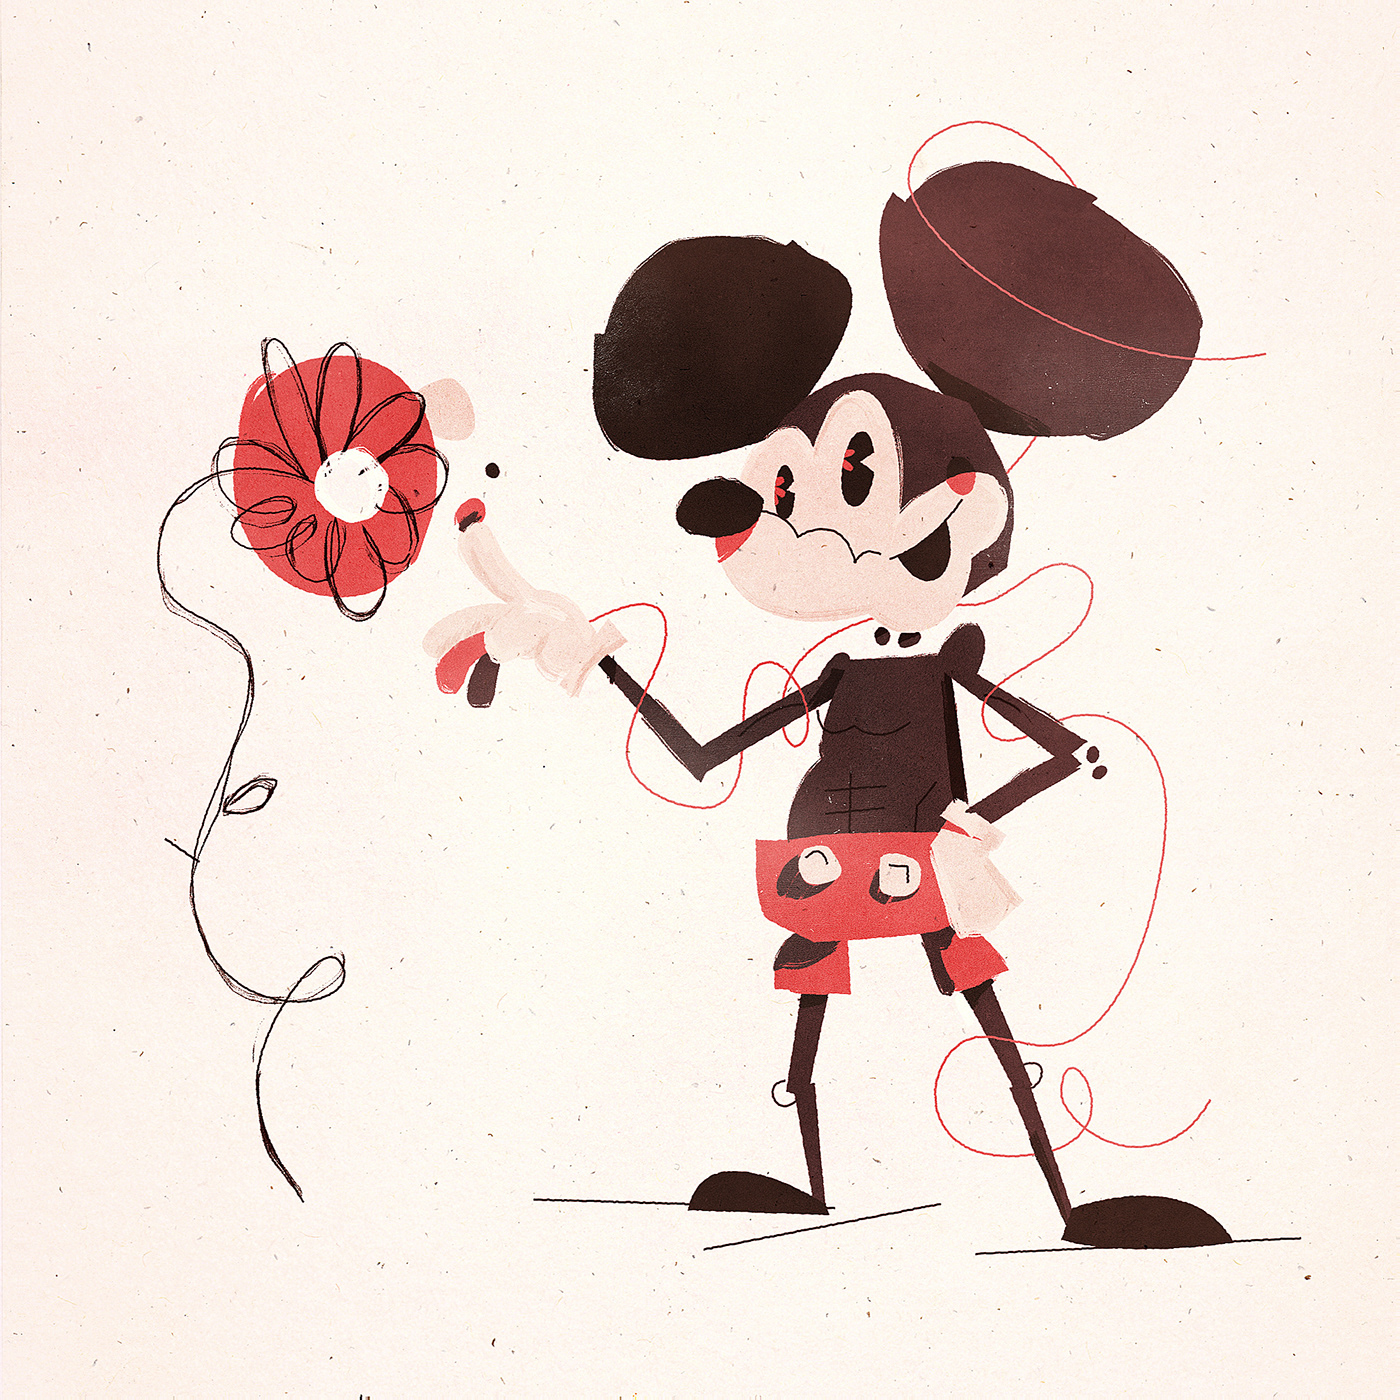 a clusmy illustration of Mickey Mouse poking a flower, with the flower shining in his eyes.